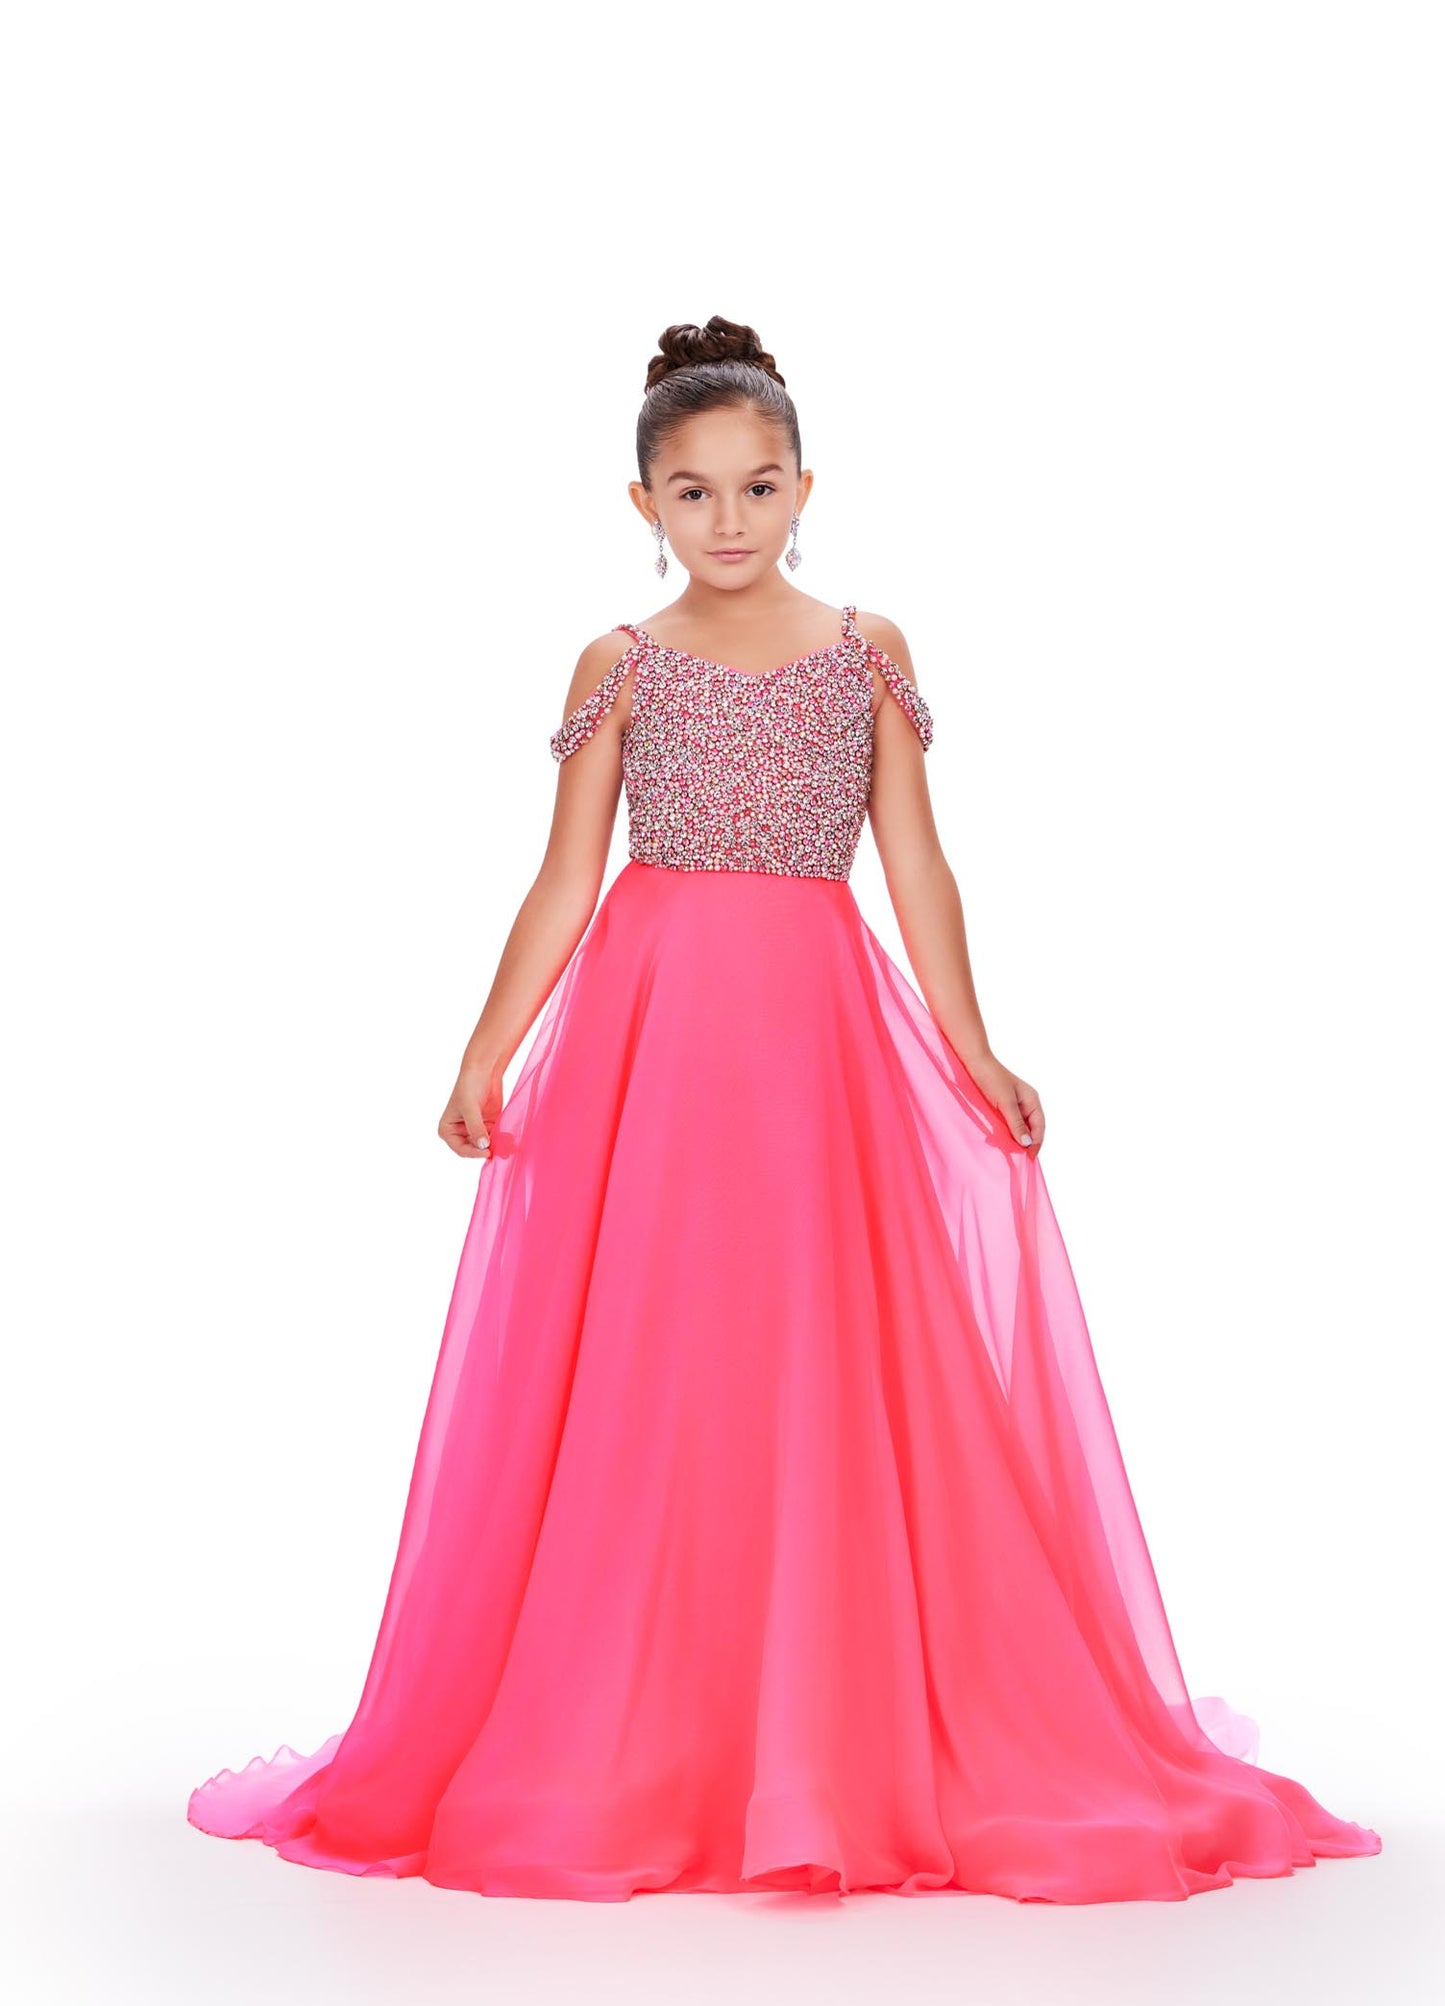 Ashley Lauren Kids 8220 girls hot pink pageant gown. Beaded Bustier A-Line Off The Shoulder Sweetheart Neckline Chiffon Gown. We are obsessed with this elegant gown! The fully beaded bodice features off shoulder straps and a fabulous, flowy chiffon skirt.